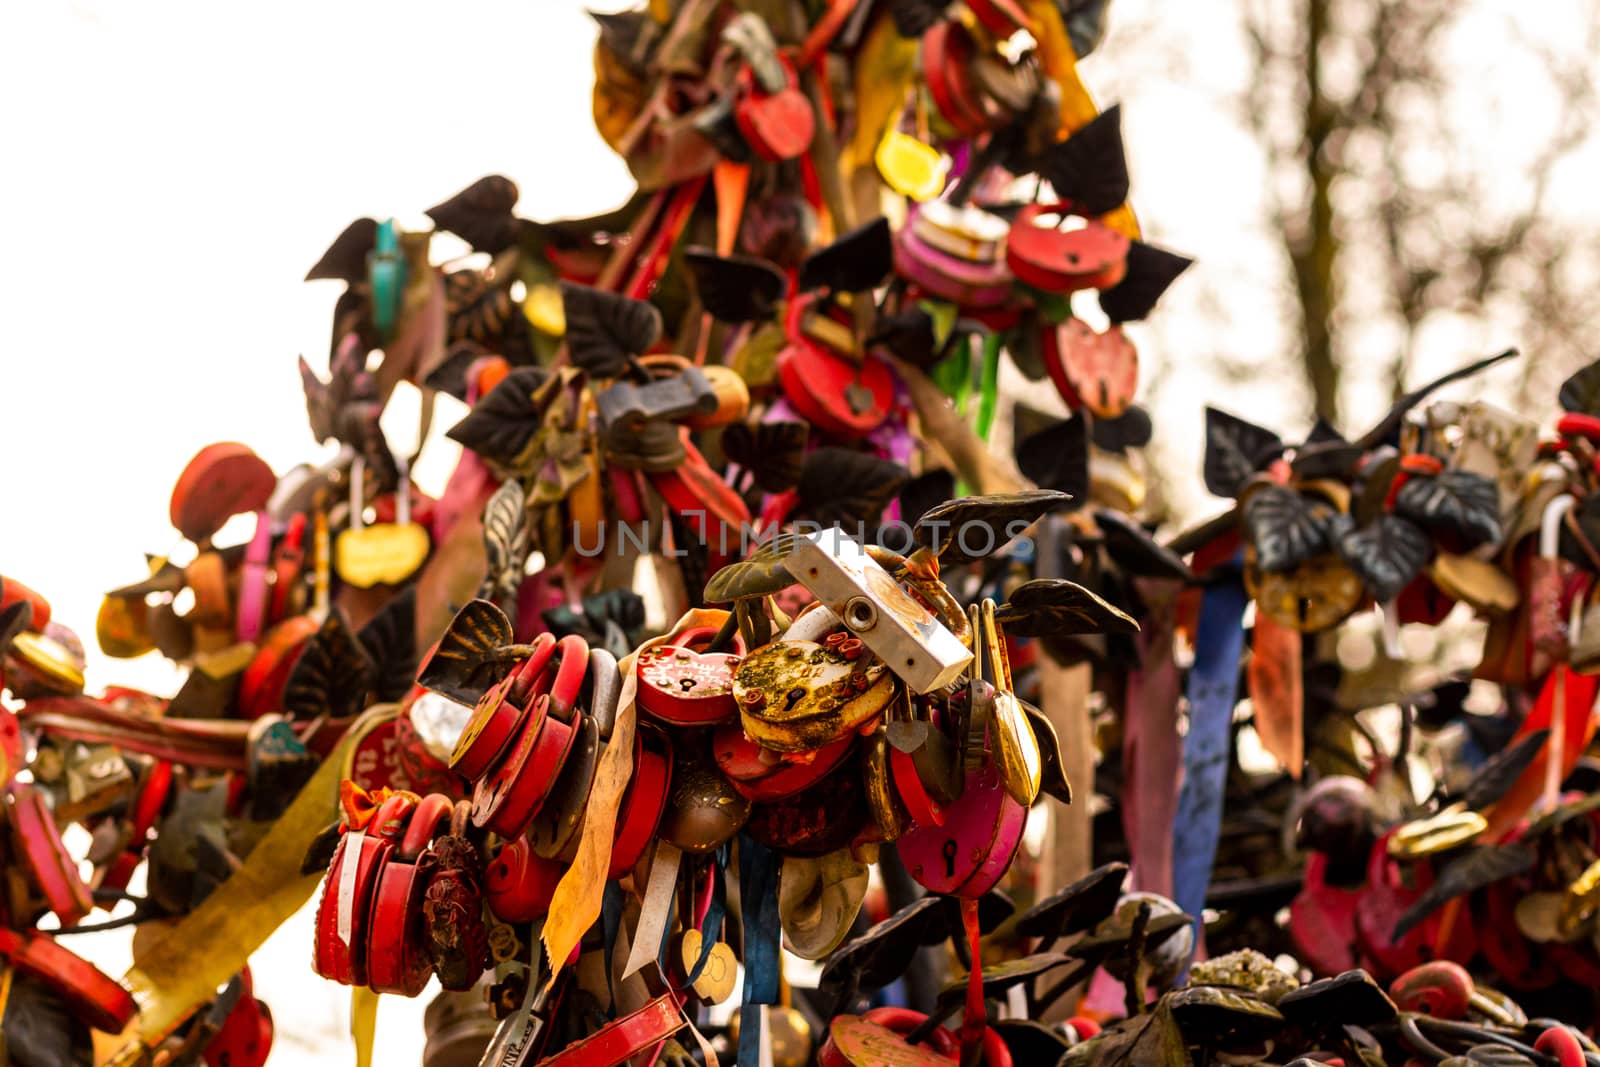 Many wedding colorful locks with the names of the newlyweds and wishes in Russian on a wedding tree. Symbol of love, marriage and happiness.